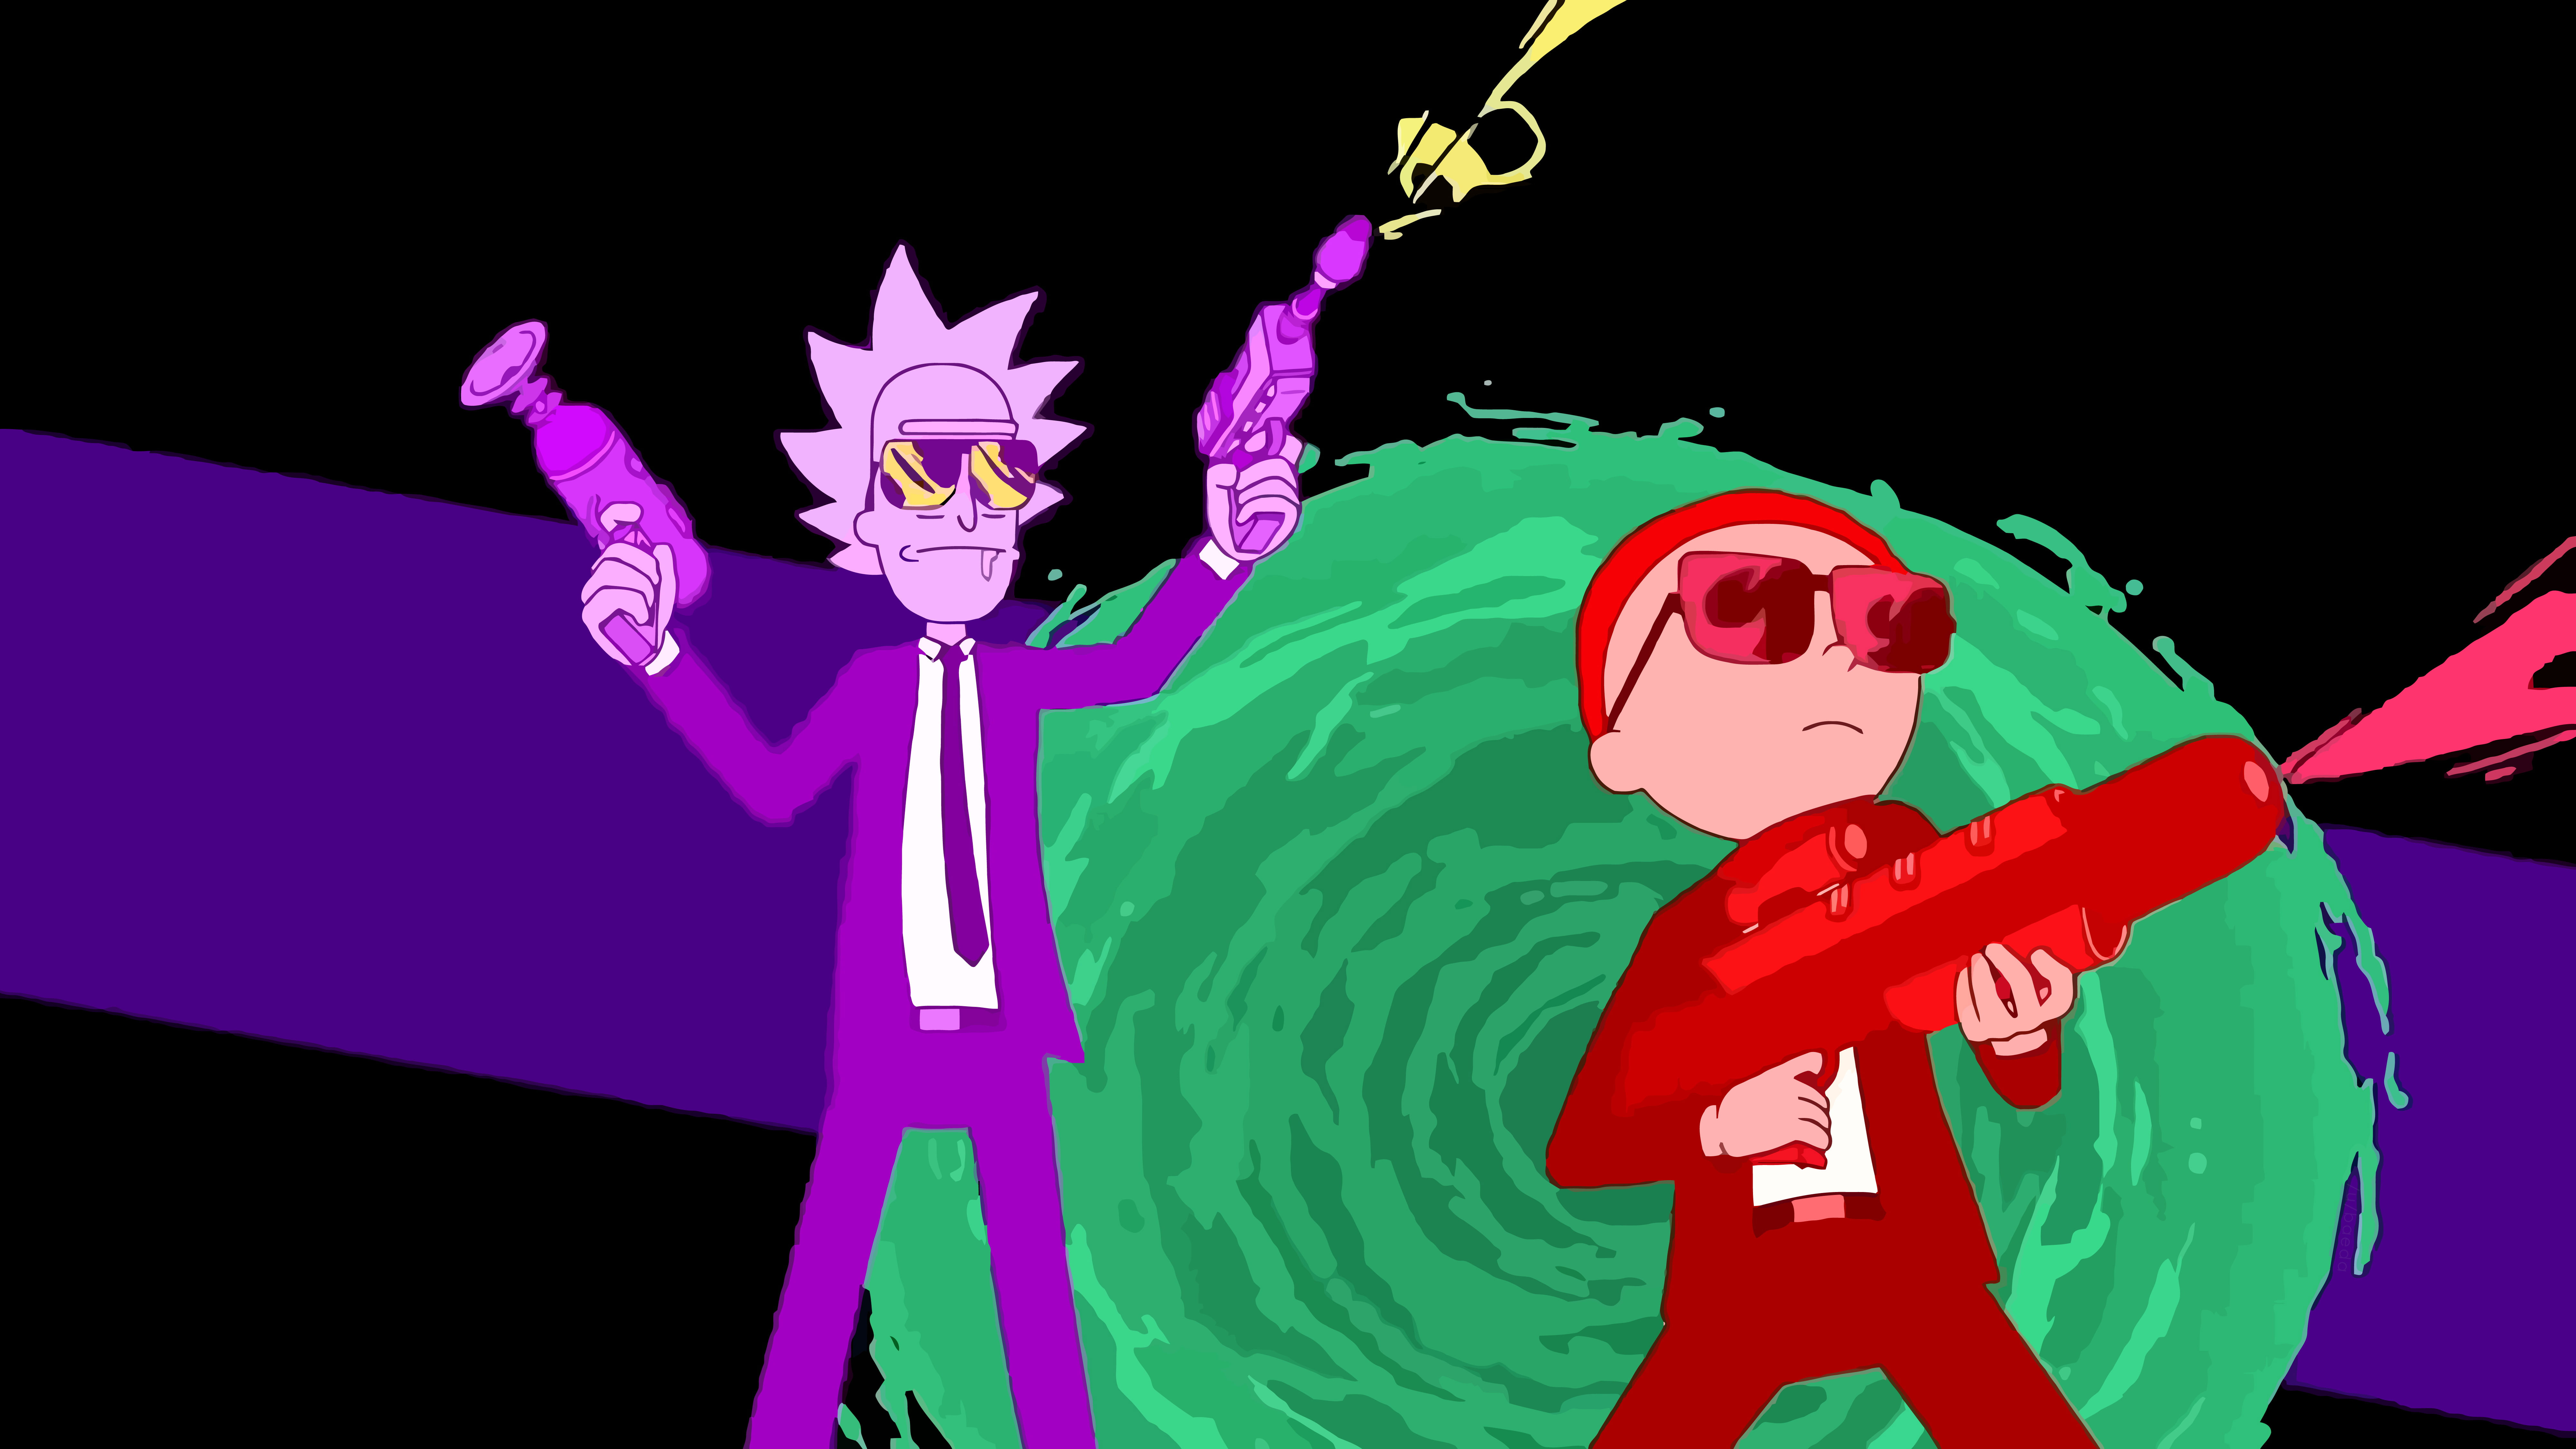 Wallpaper Rick And Morty, Run The Jewels, Vector Graphics, Rick And Morty, Movies